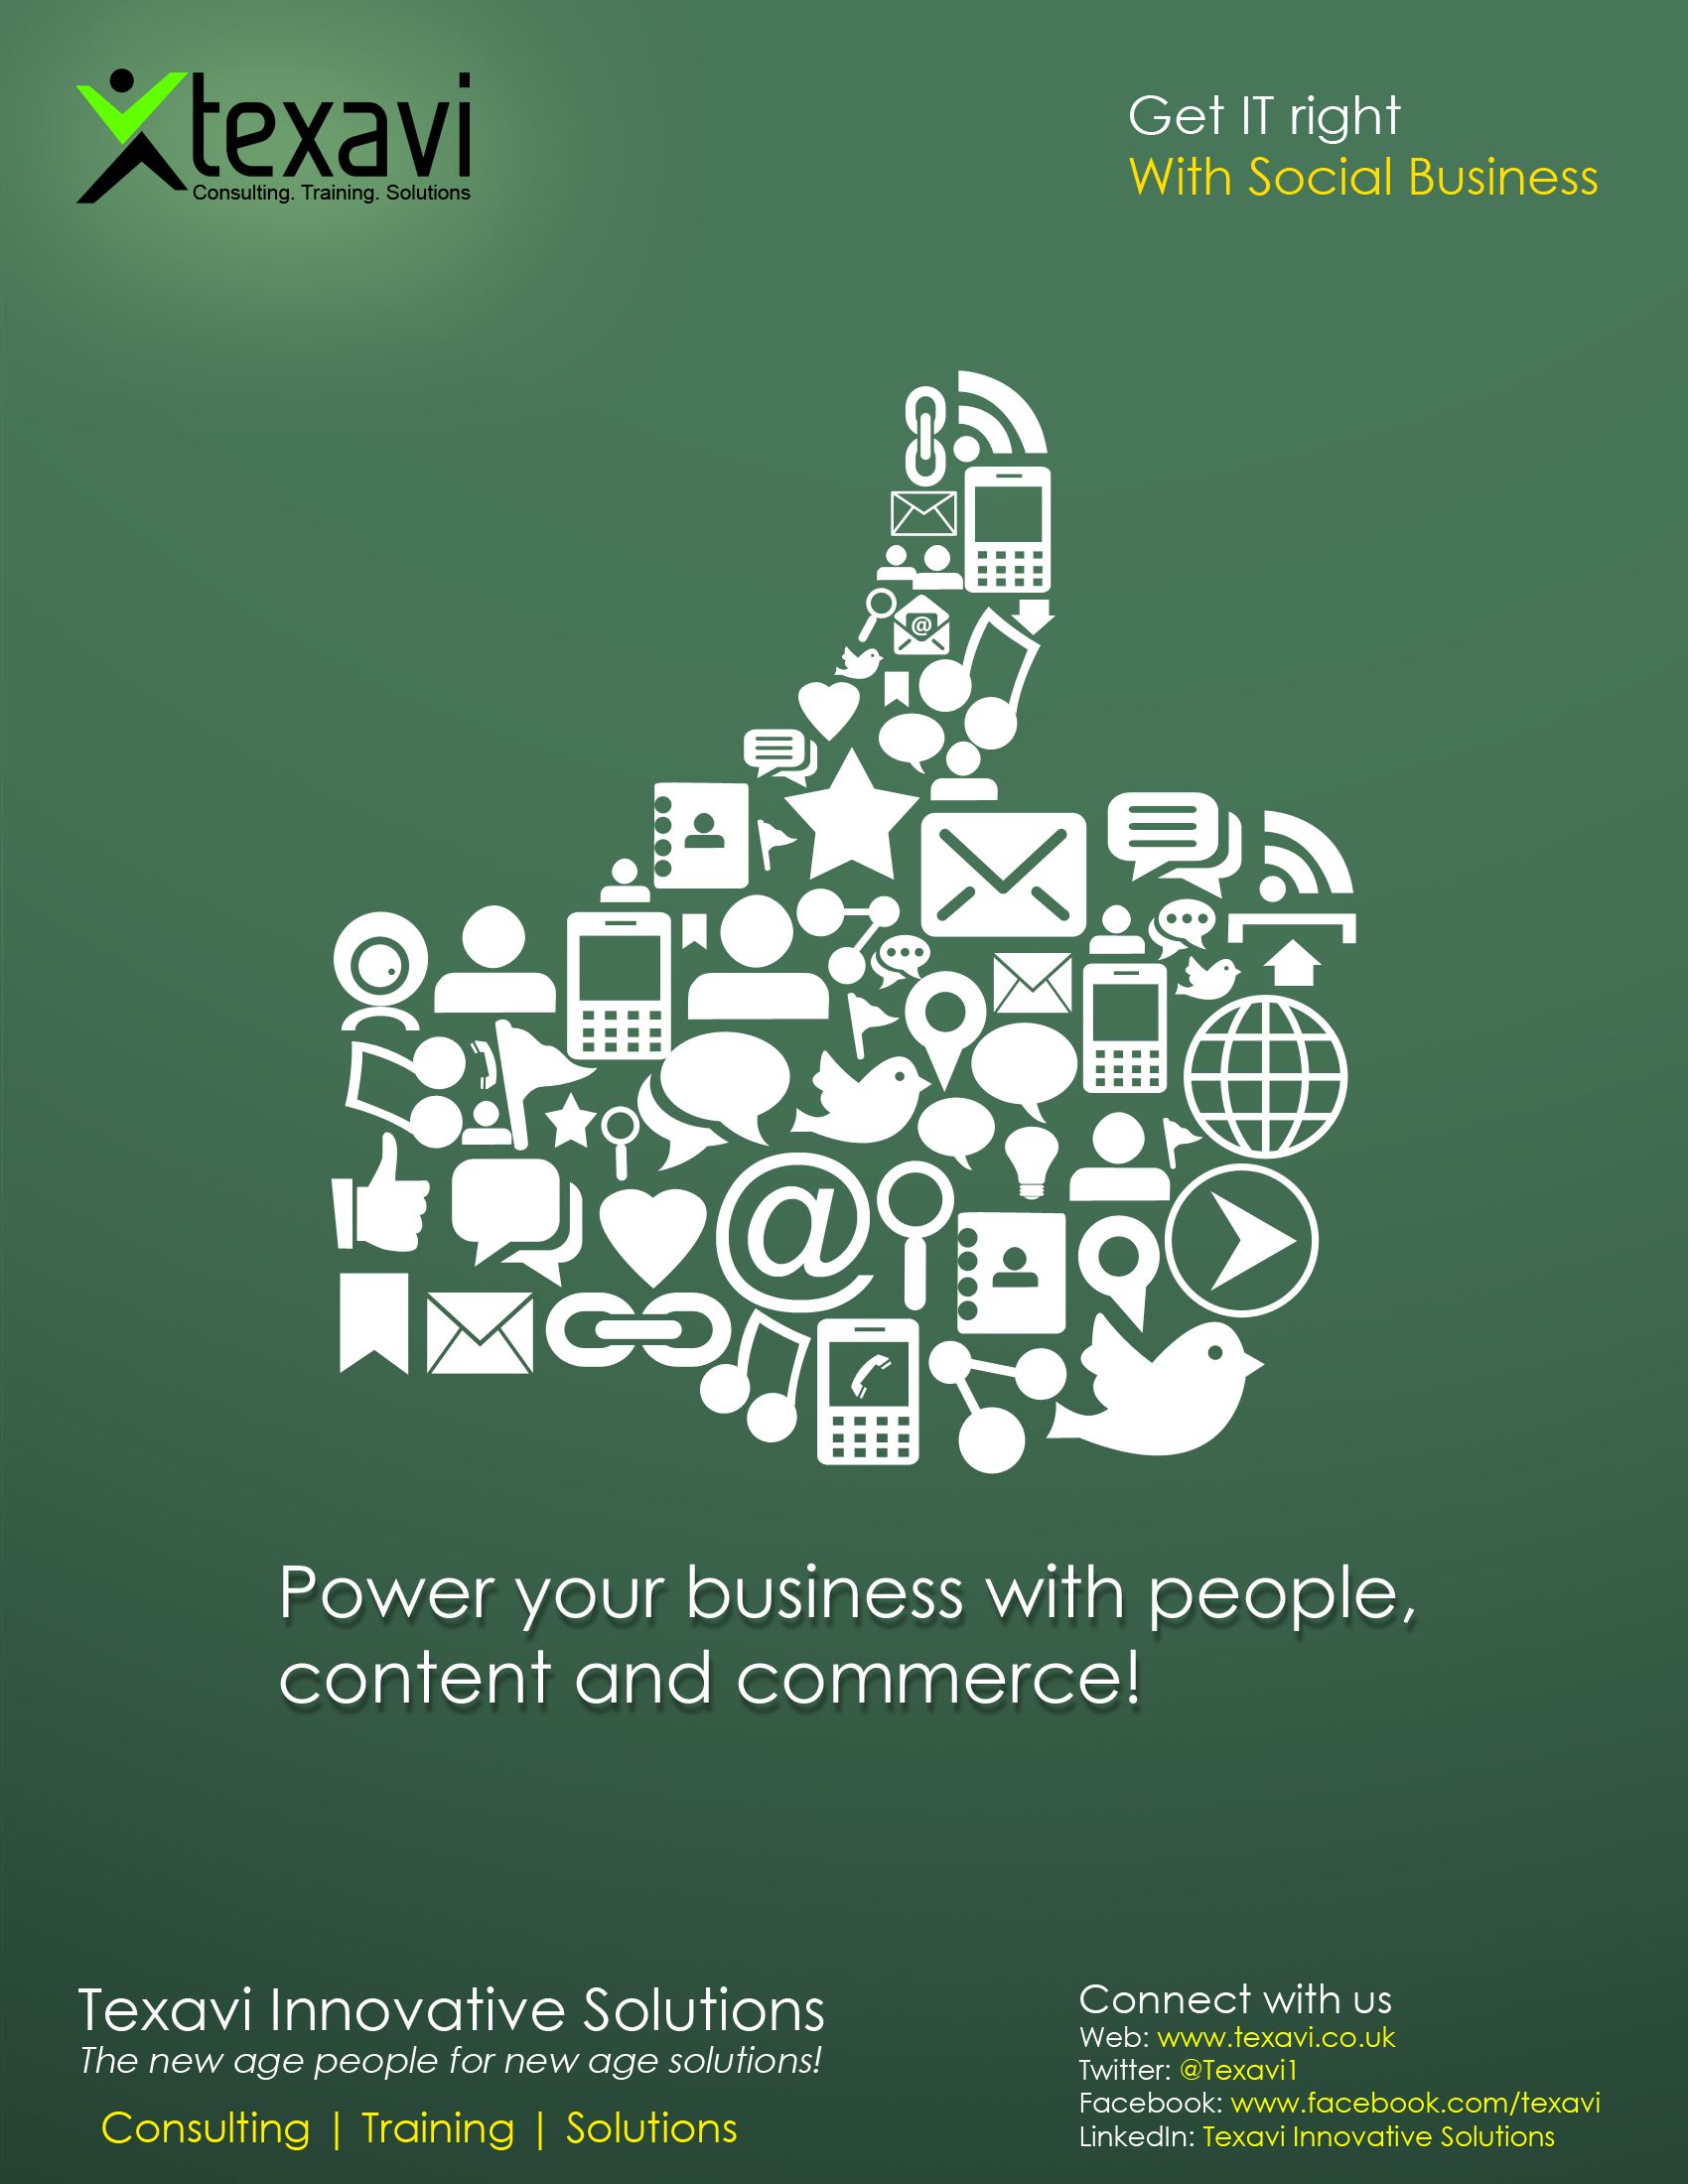 Power your social business